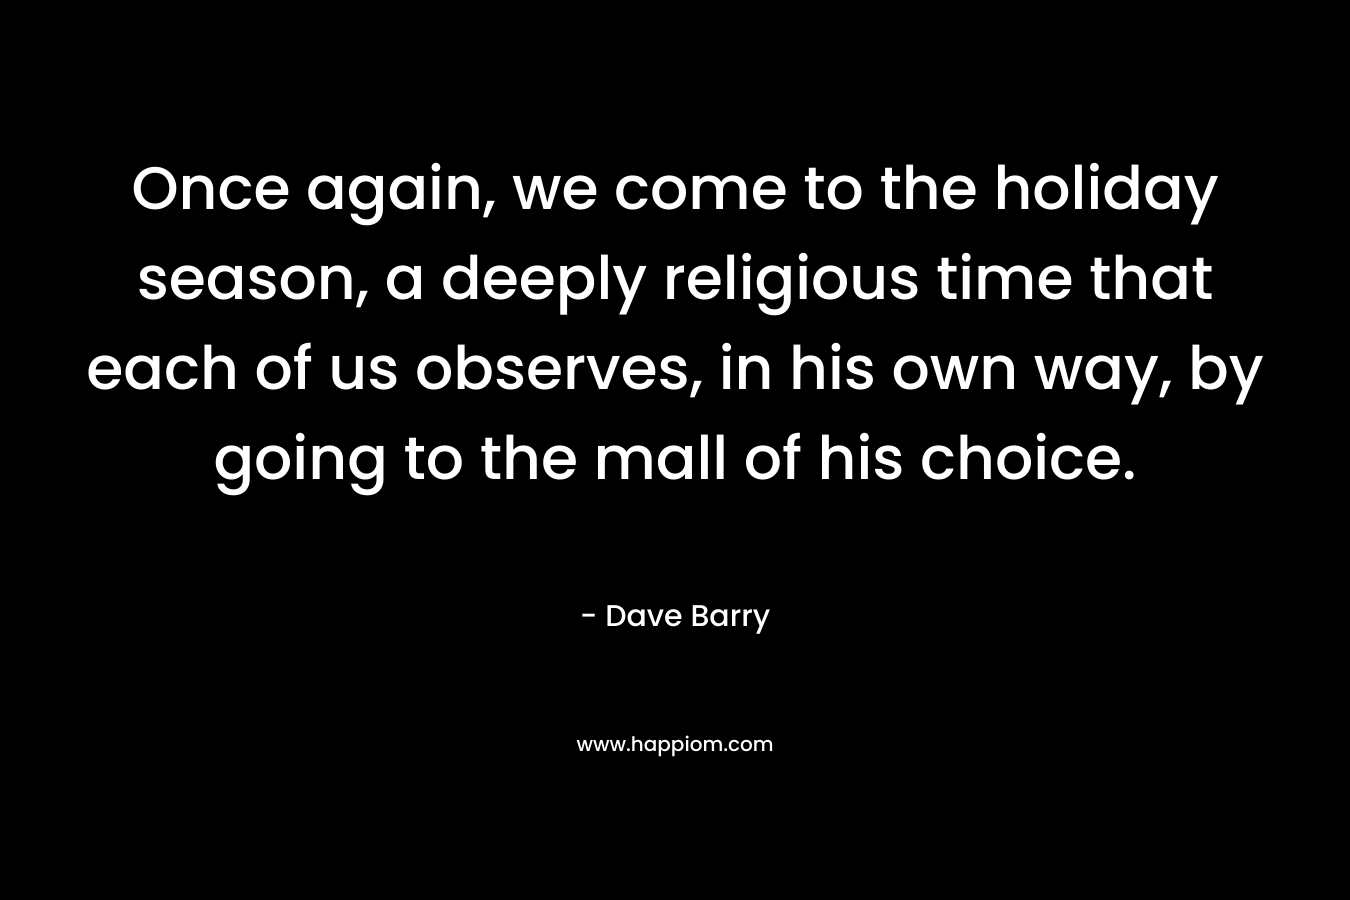 Once again, we come to the holiday season, a deeply religious time that each of us observes, in his own way, by going to the mall of his choice. – Dave Barry